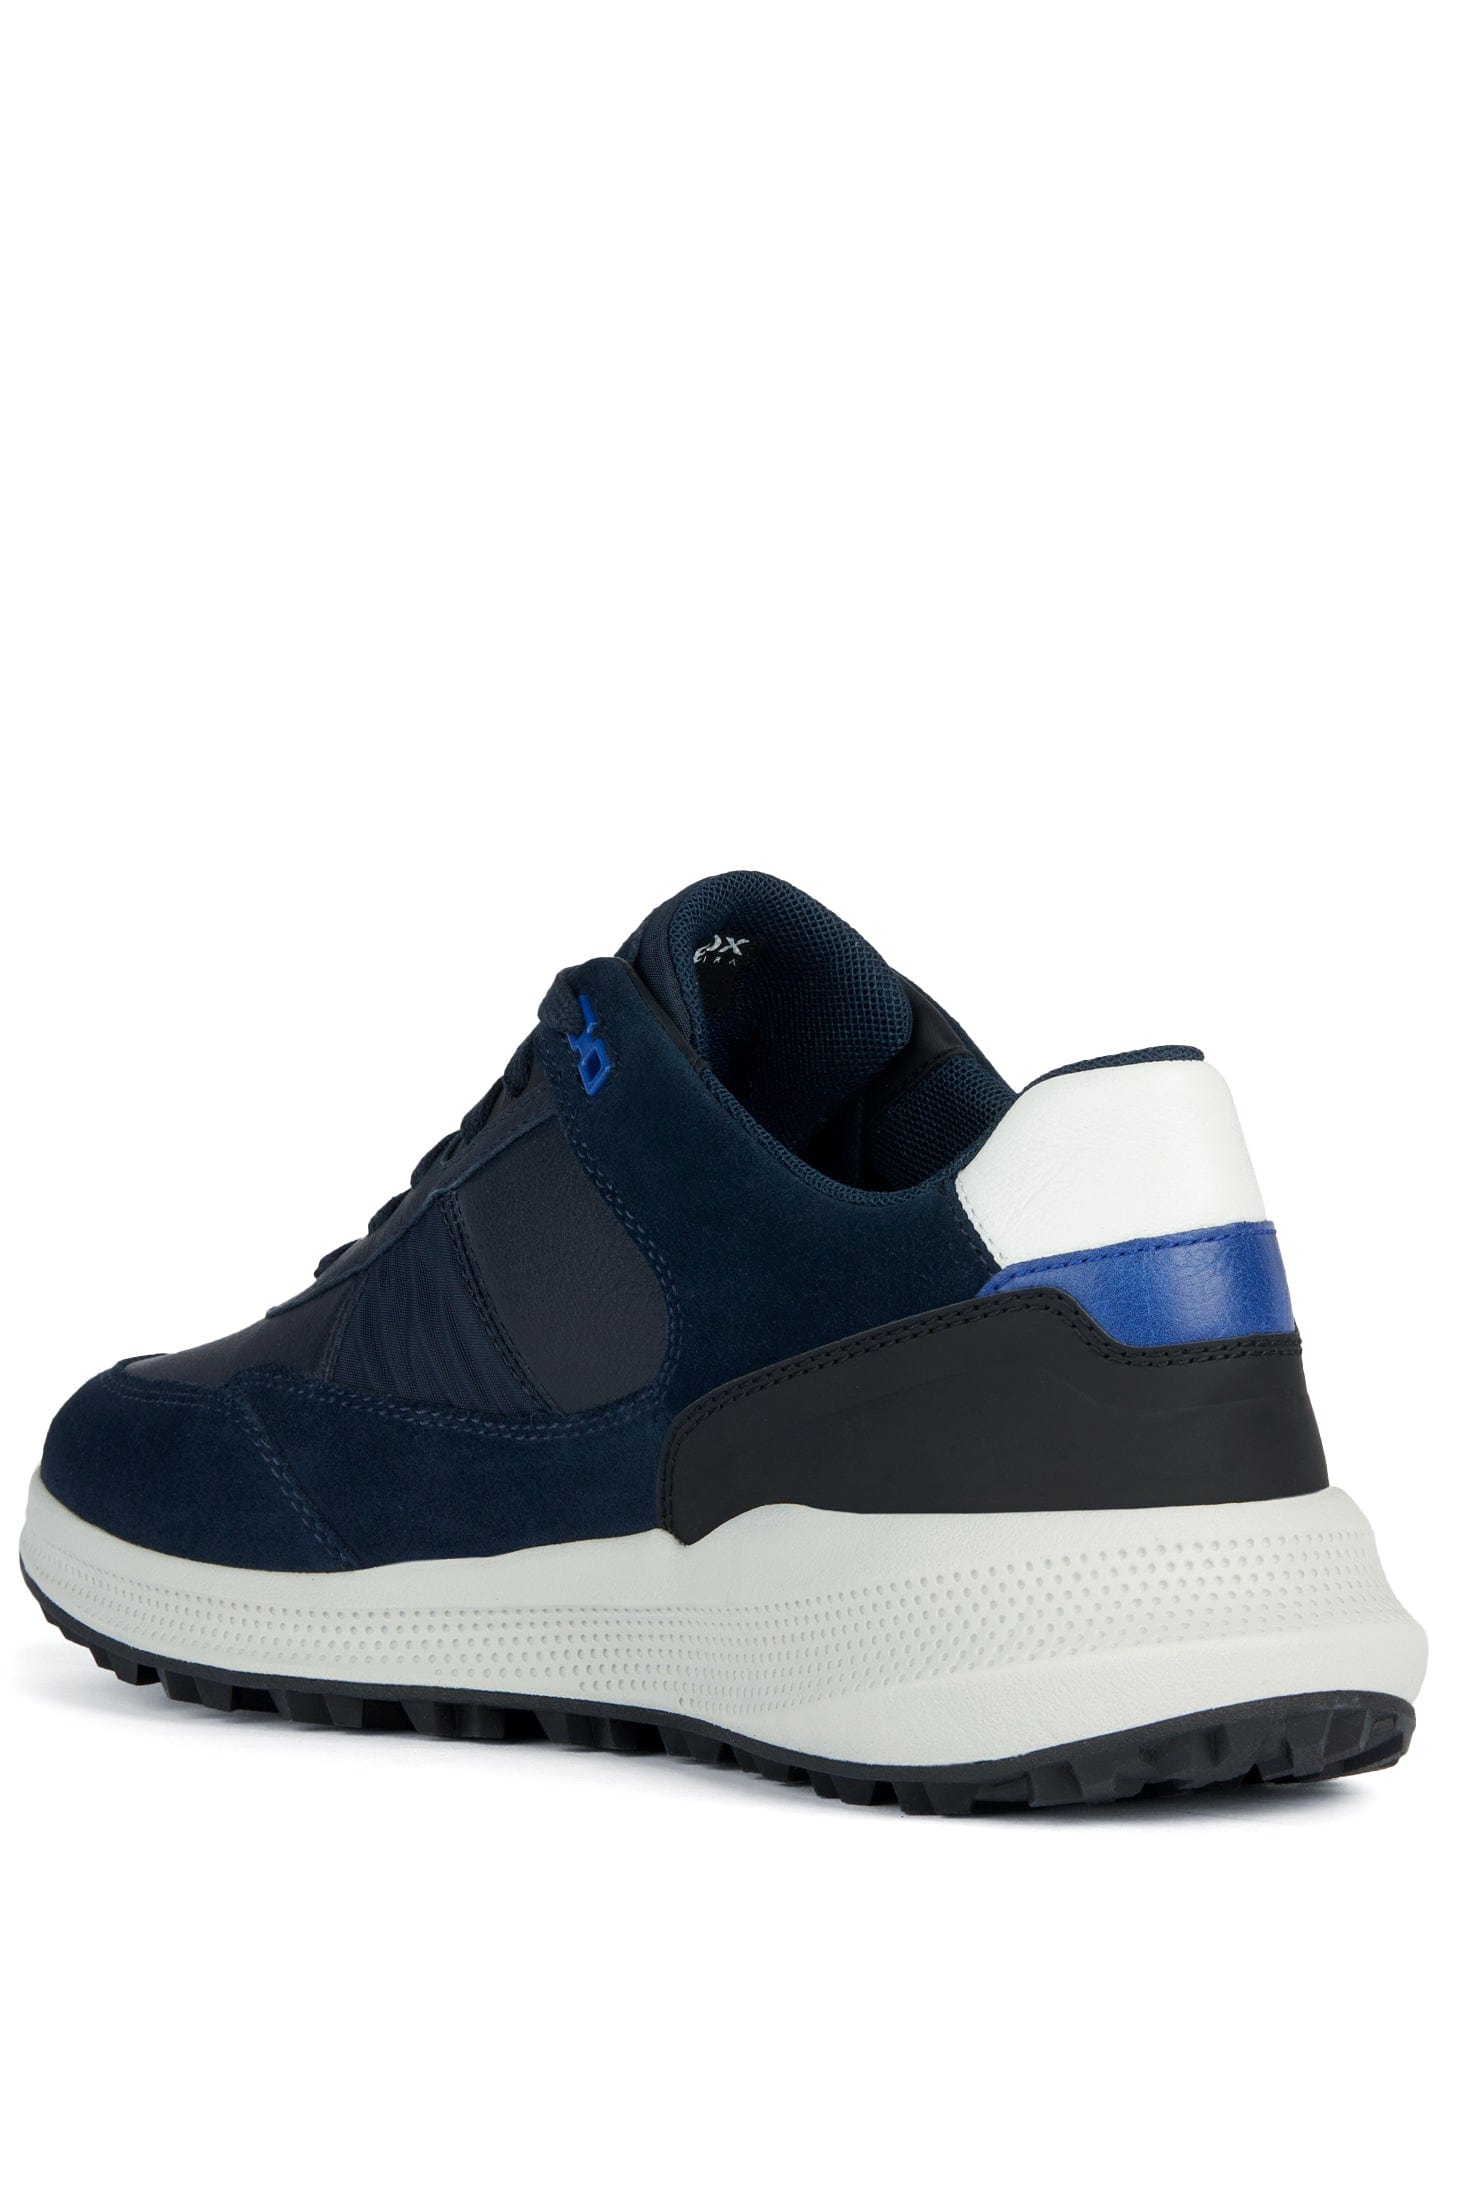 Geox Men's PG1X B ABX Trainers - Navy – Potters of Buxton